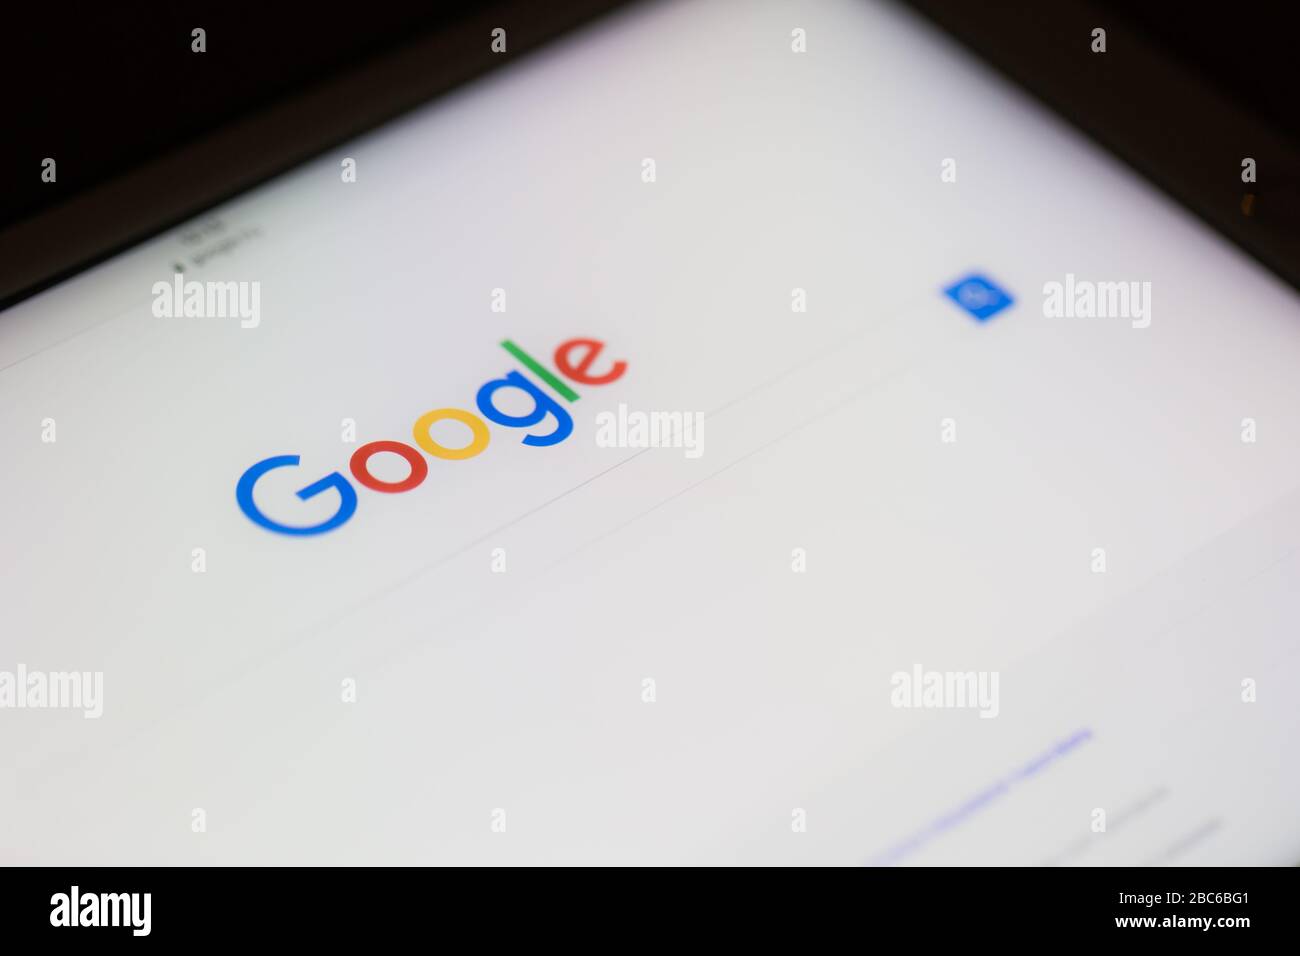 Hungary, Budapest: 10.12.2018. Google.com homepage and cursor on the screen. Google is world's most popular search engine, with phone search Stock Photo